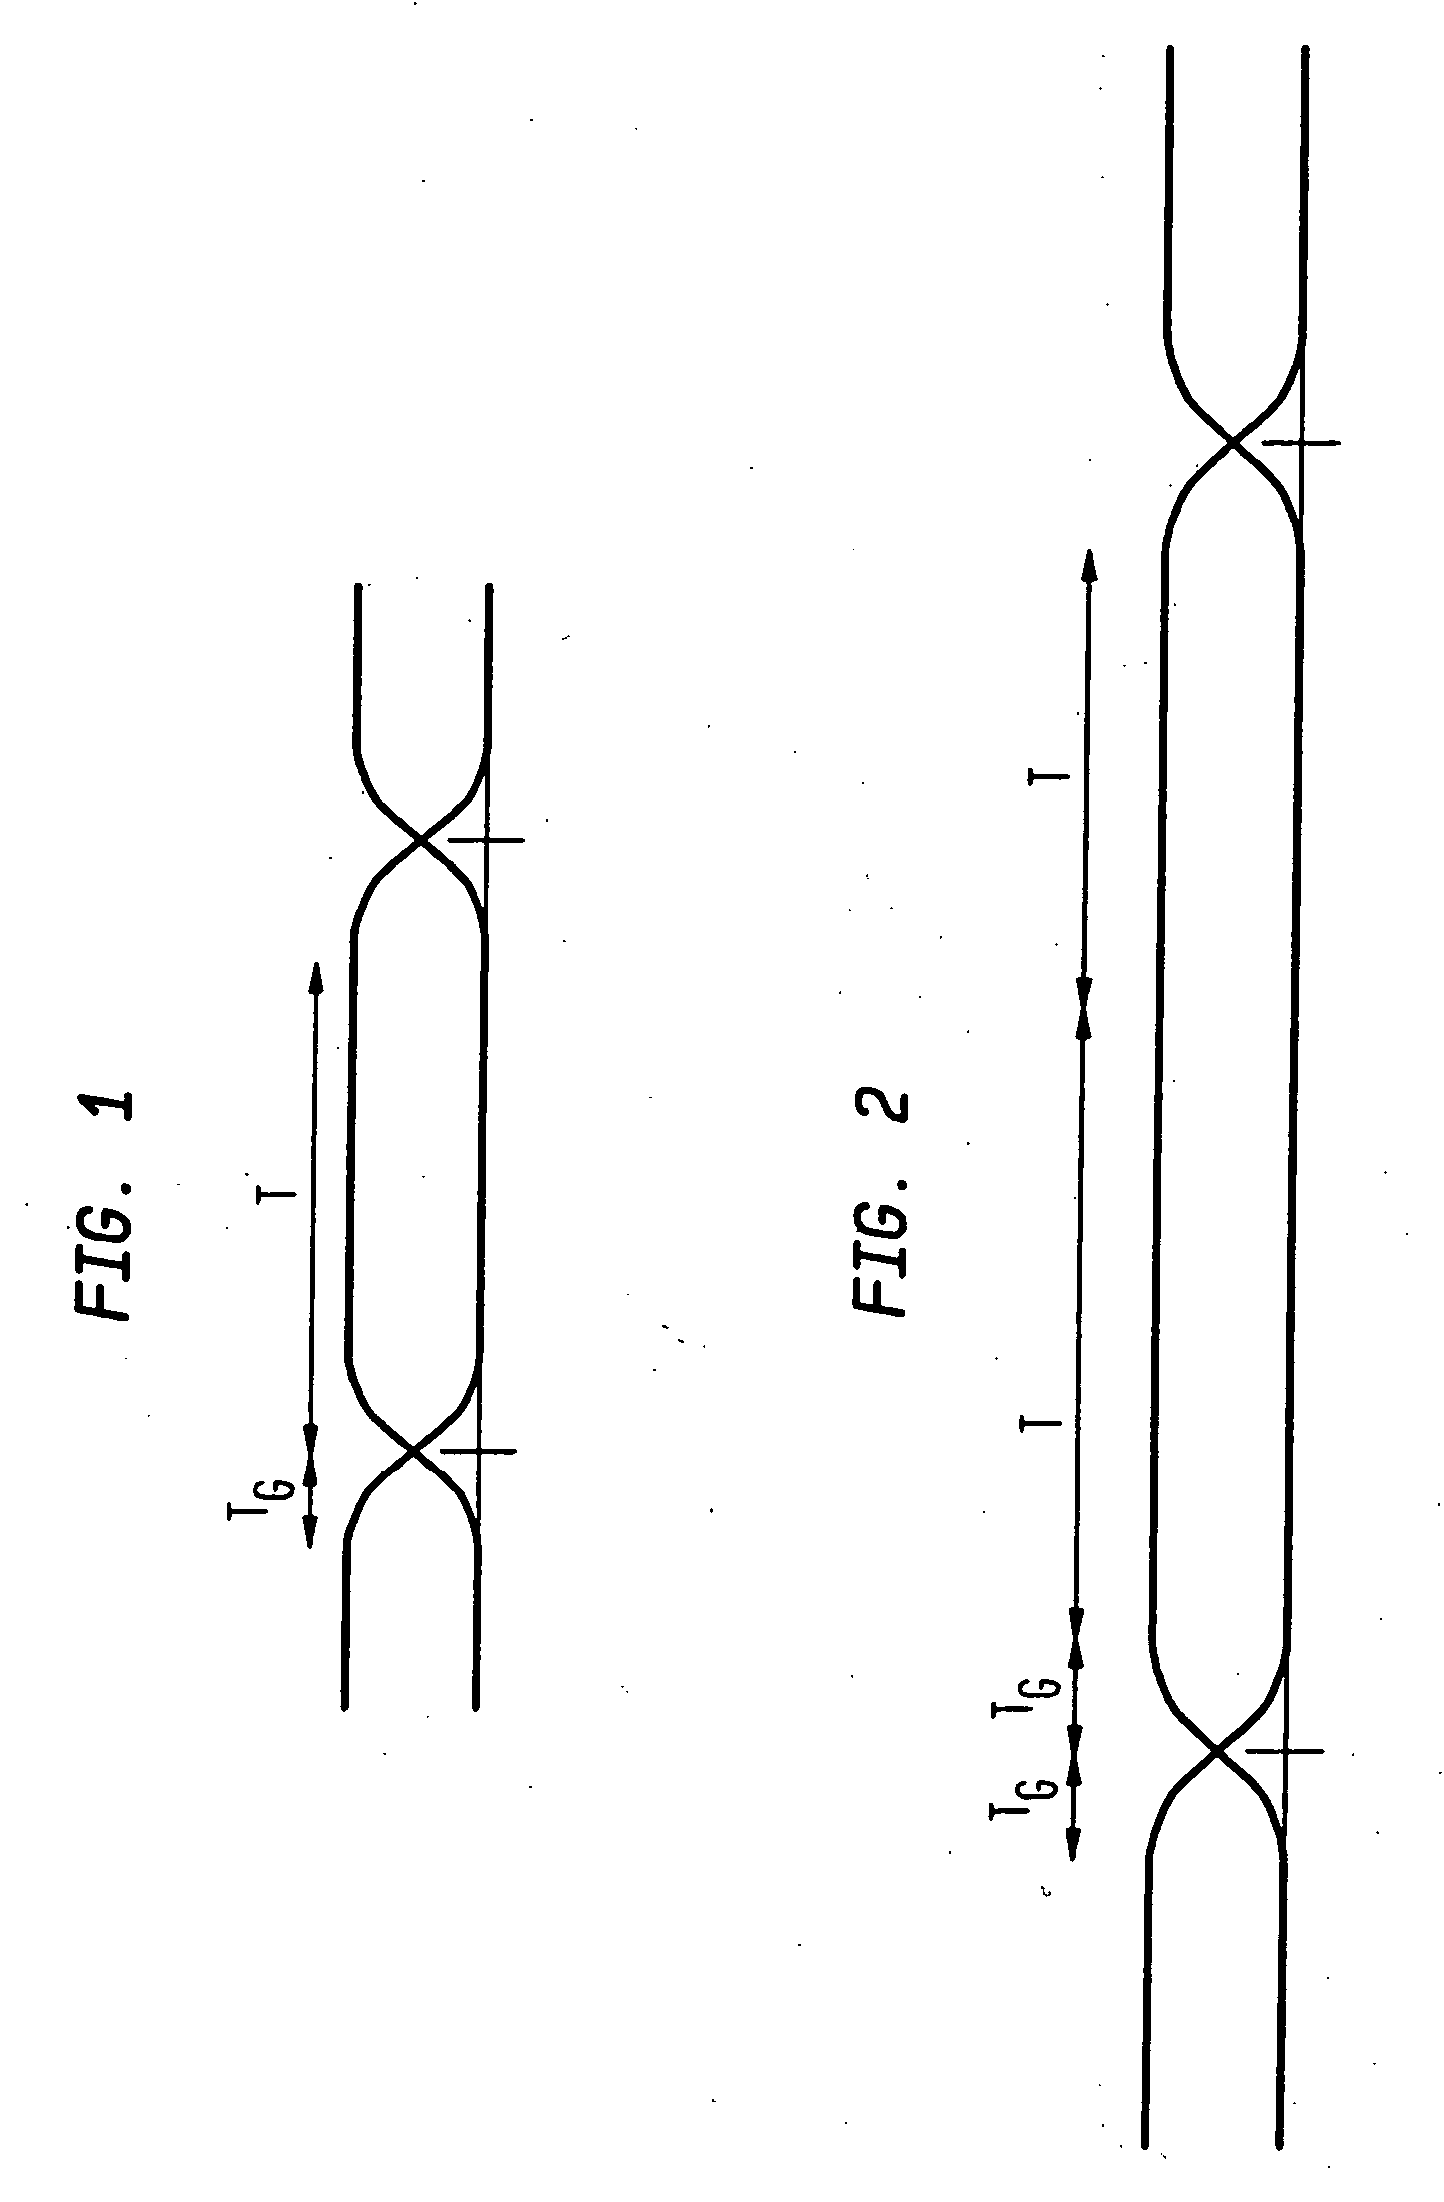 Frequency division multiplexing system with selectable rate